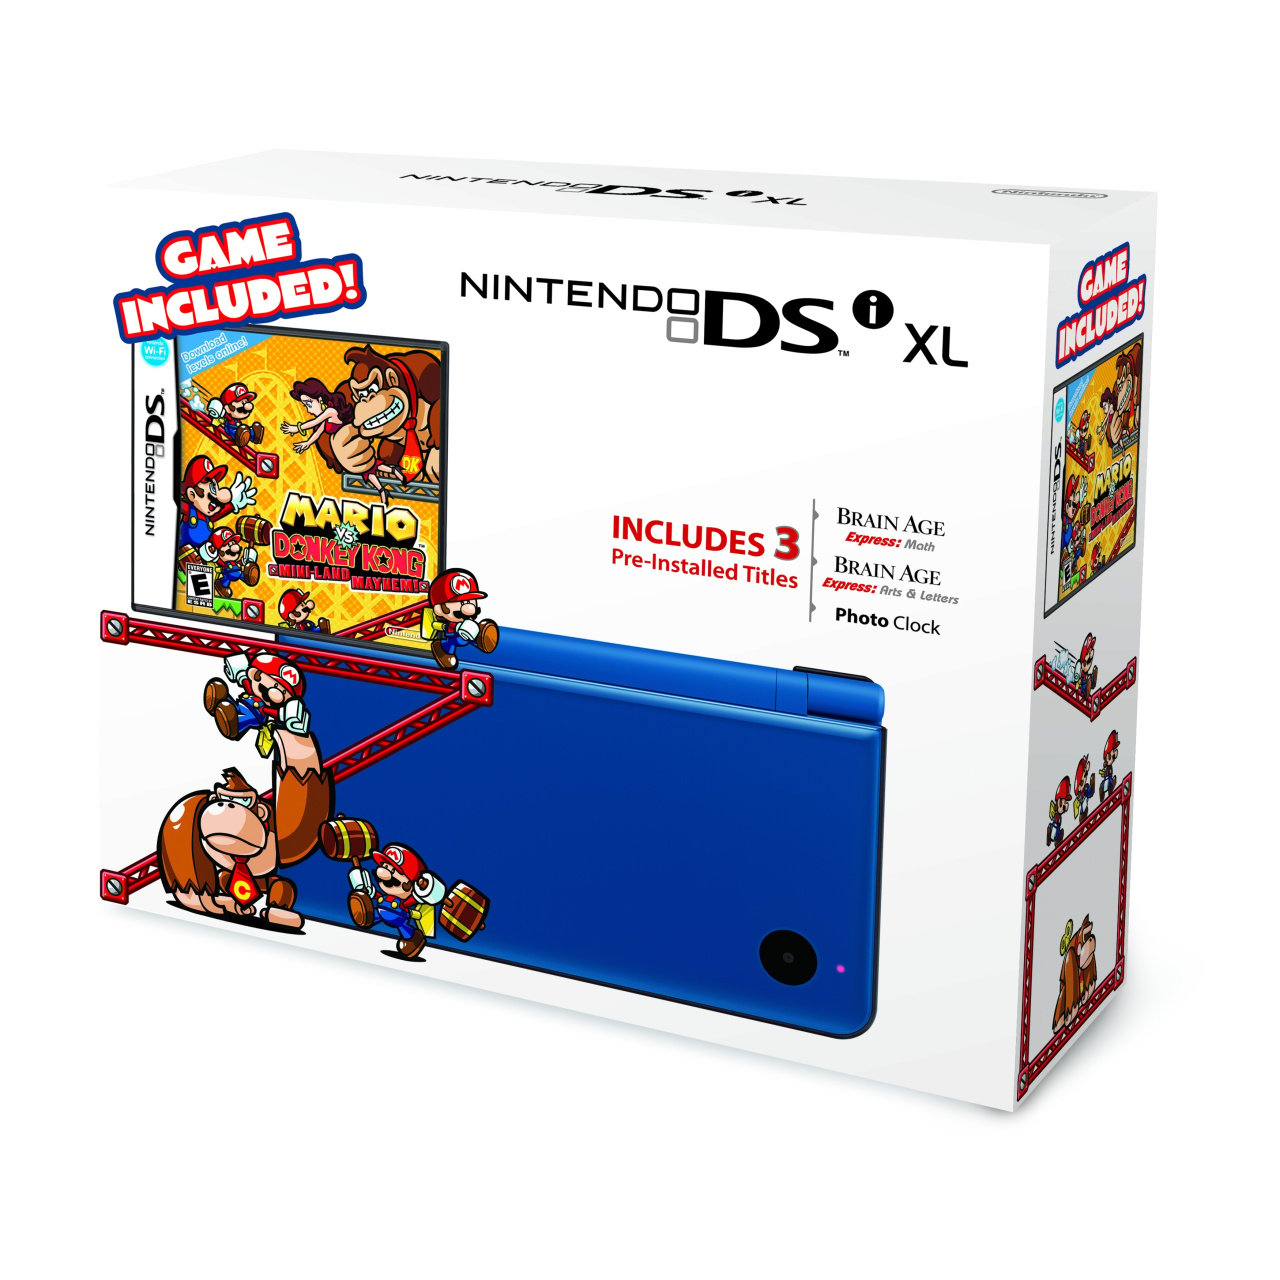 Nintendo DSi XL gets official North American release date